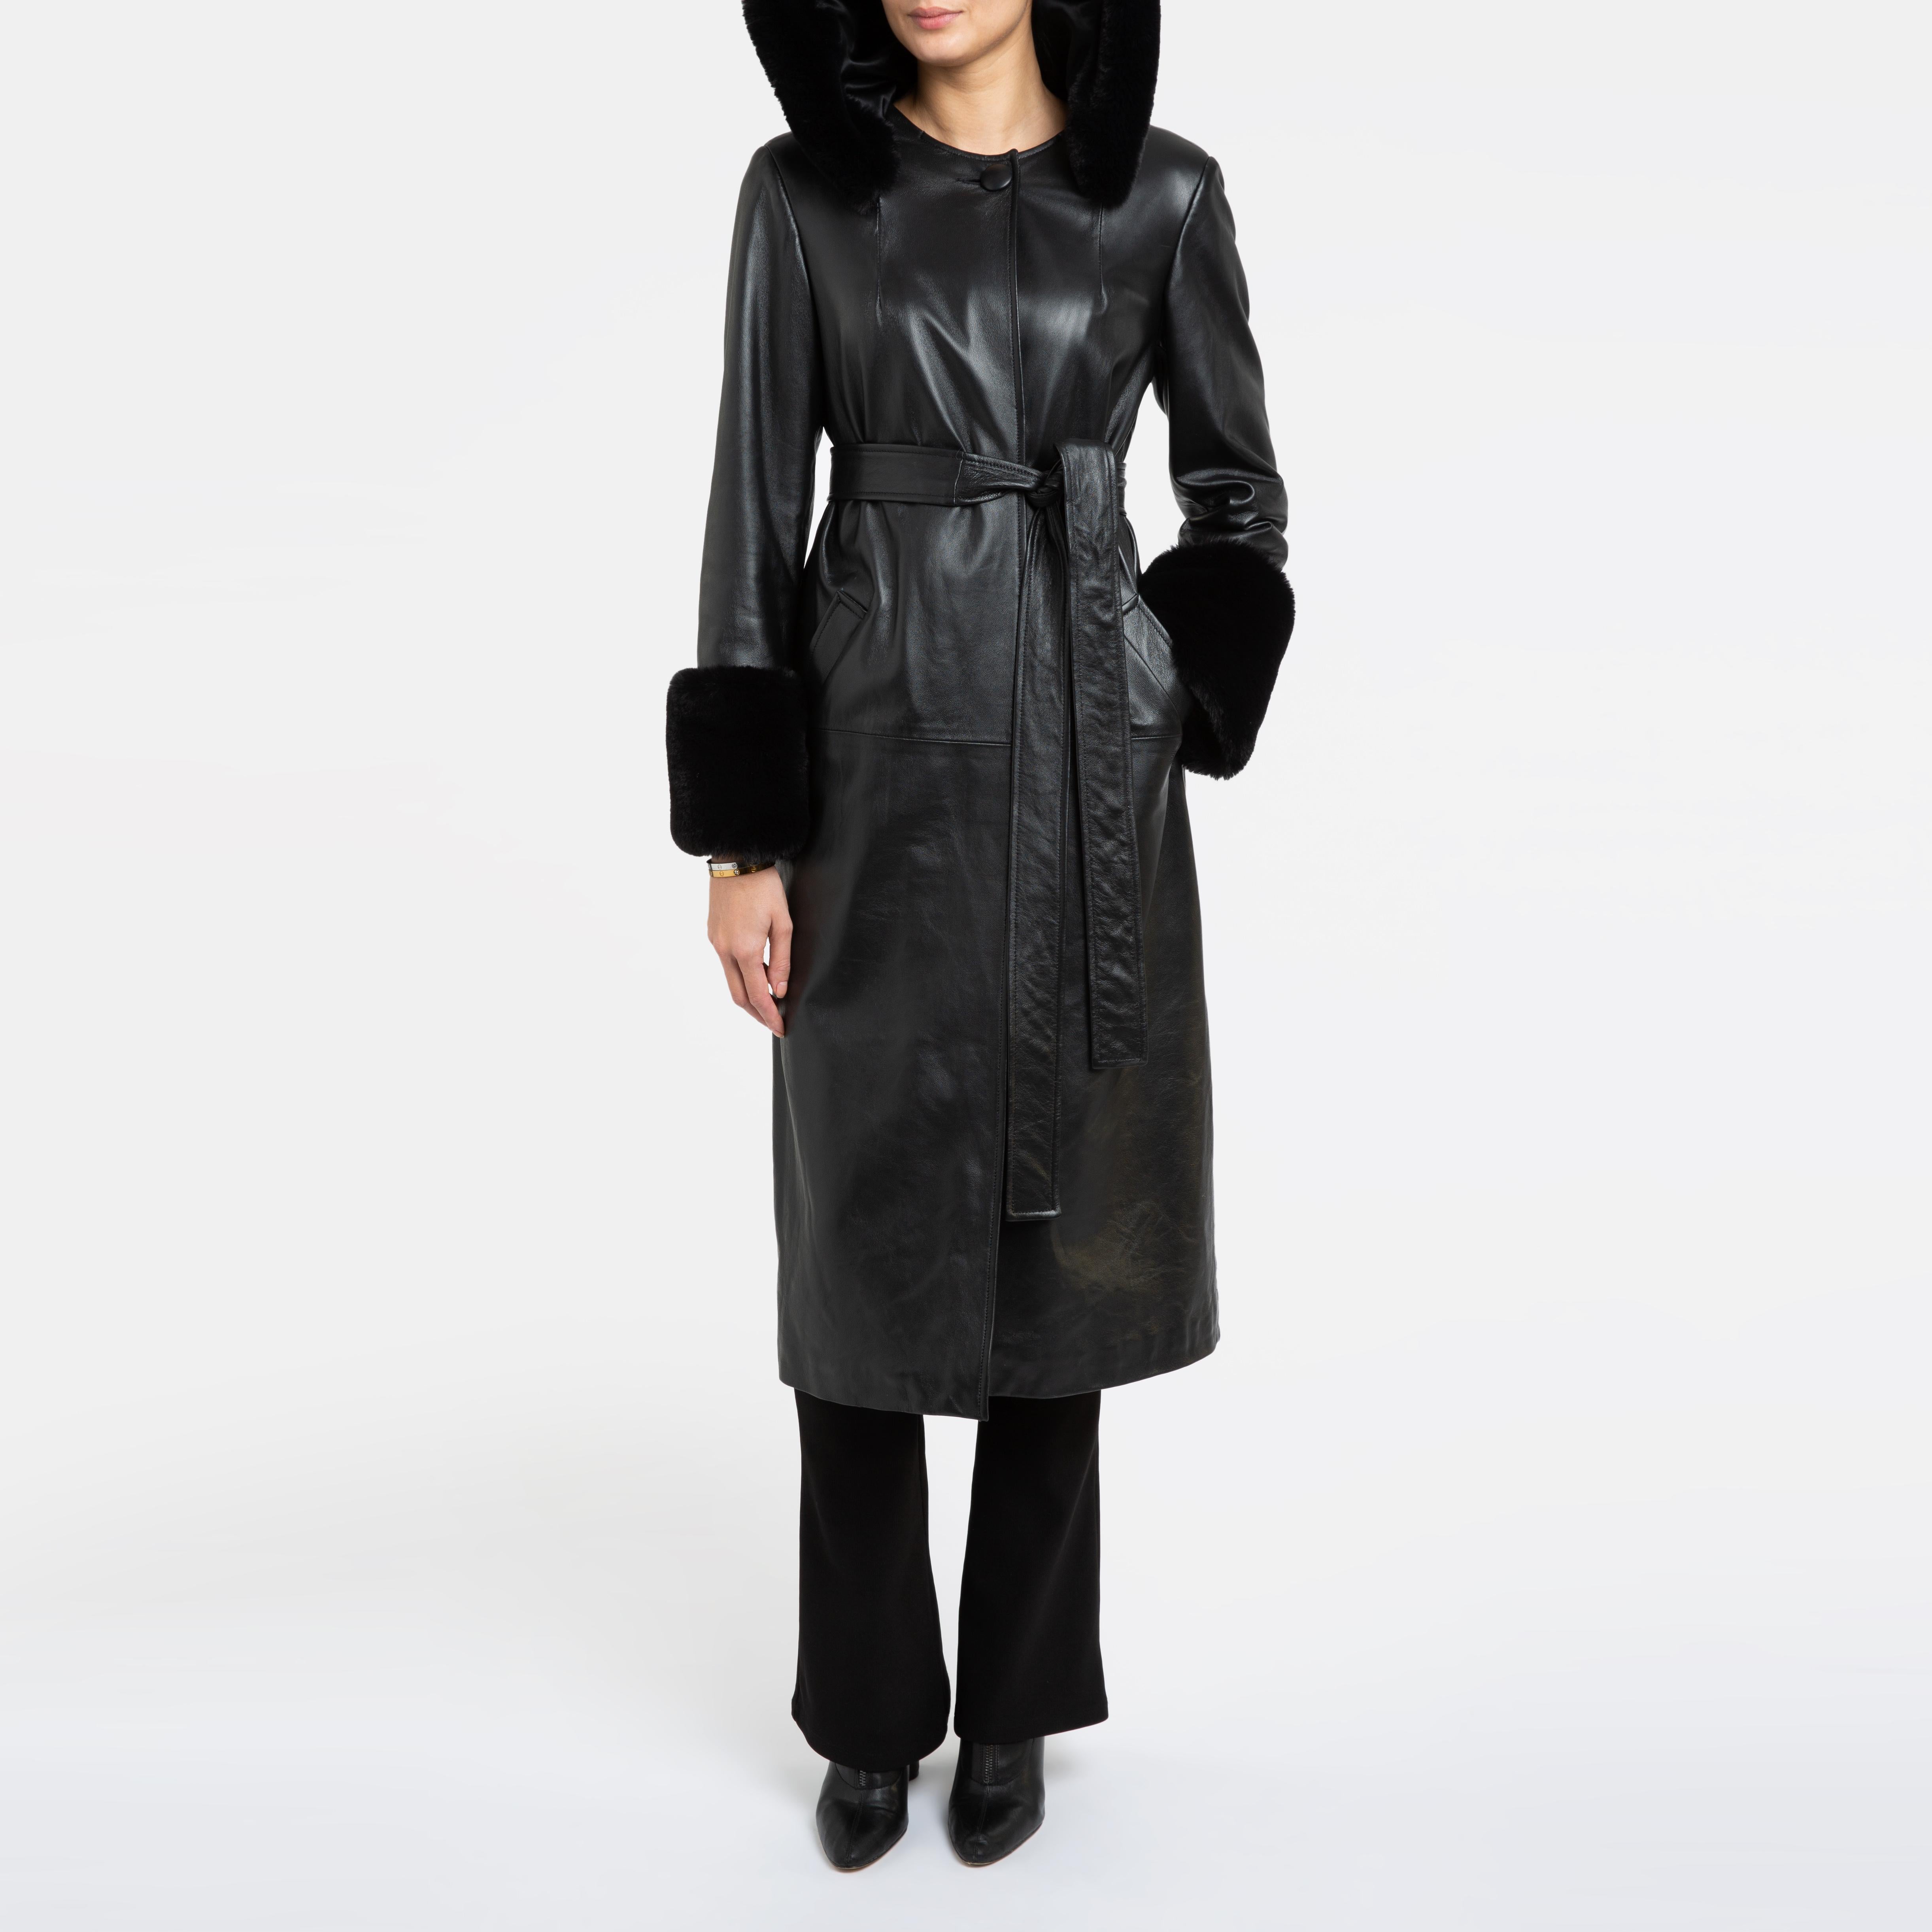 Verheyen London Hooded Leather Trench Coat in Black with Faux Fur - Size uk 12  For Sale 7